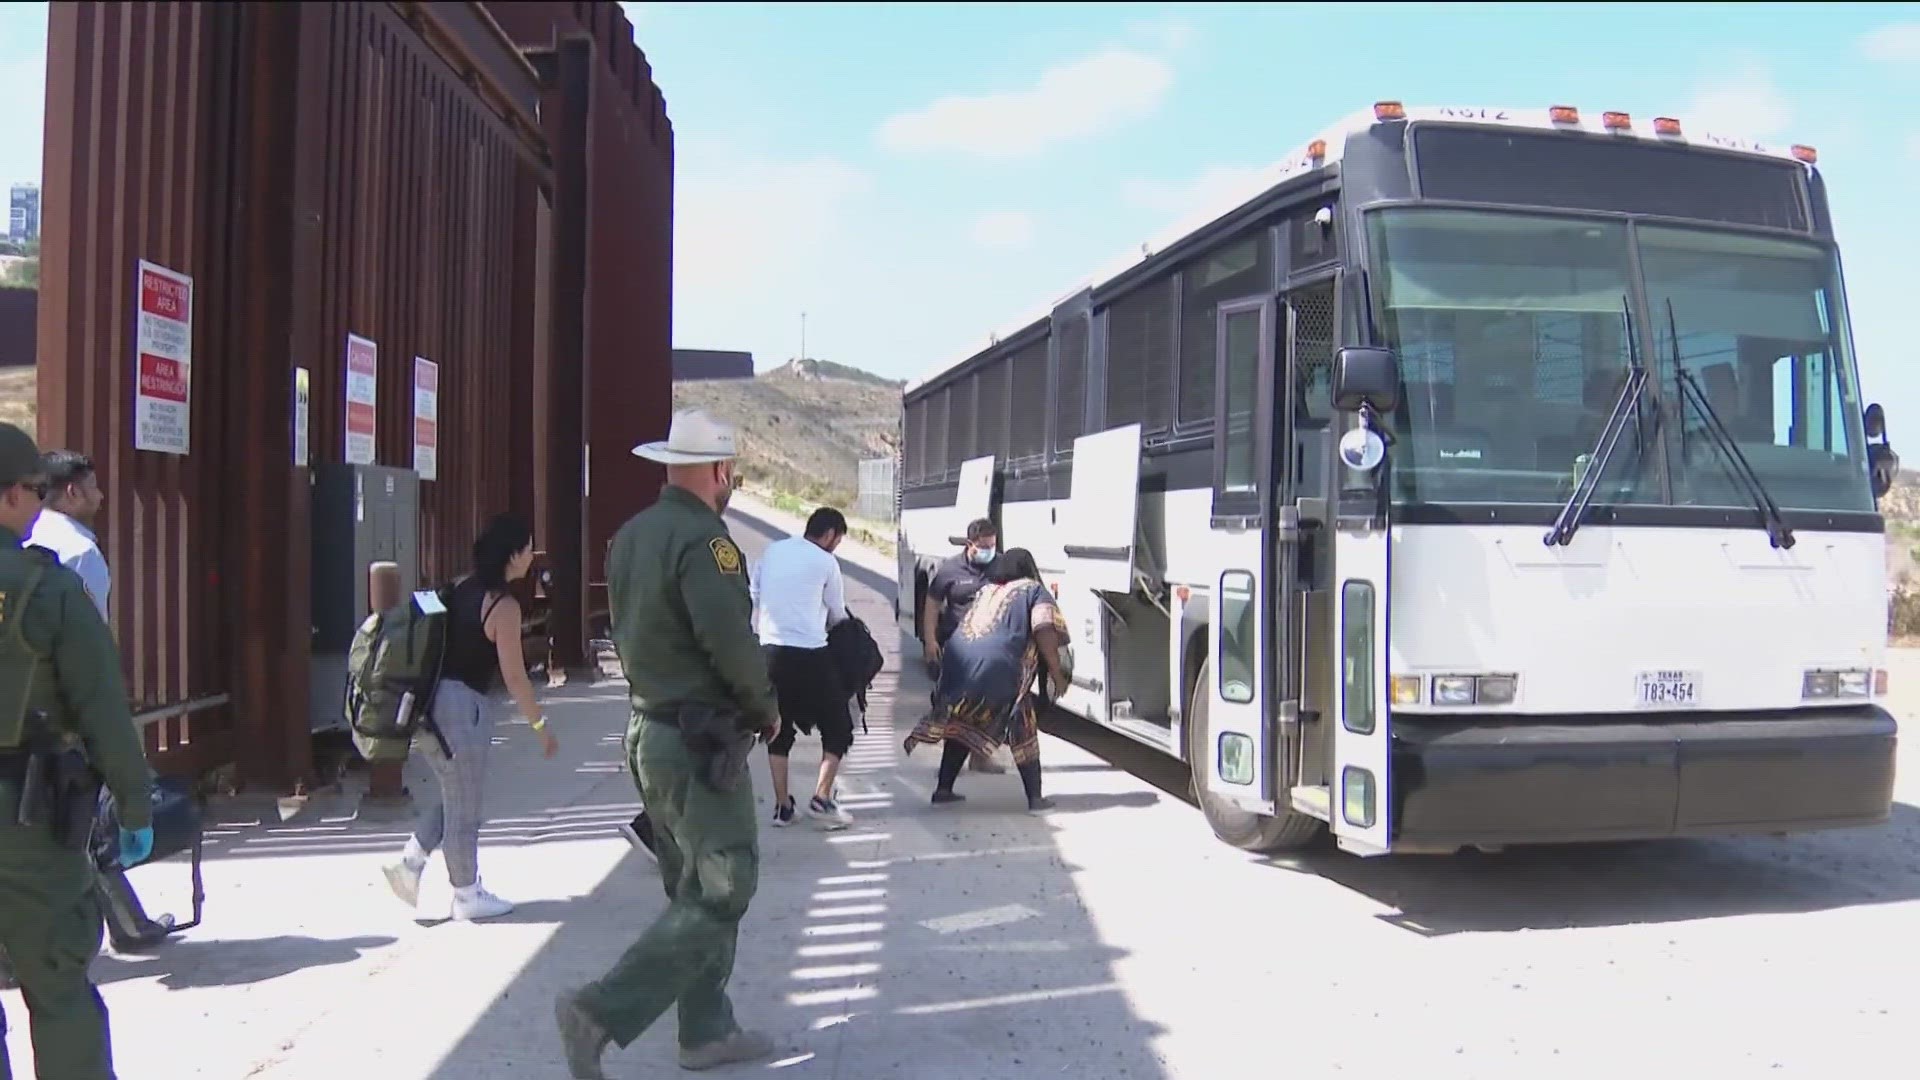 Last week, CBS 8 reported that Border Patrol had dropped 13,000 in one month's time, meaning there has been a 5,500 increase in just seven days.